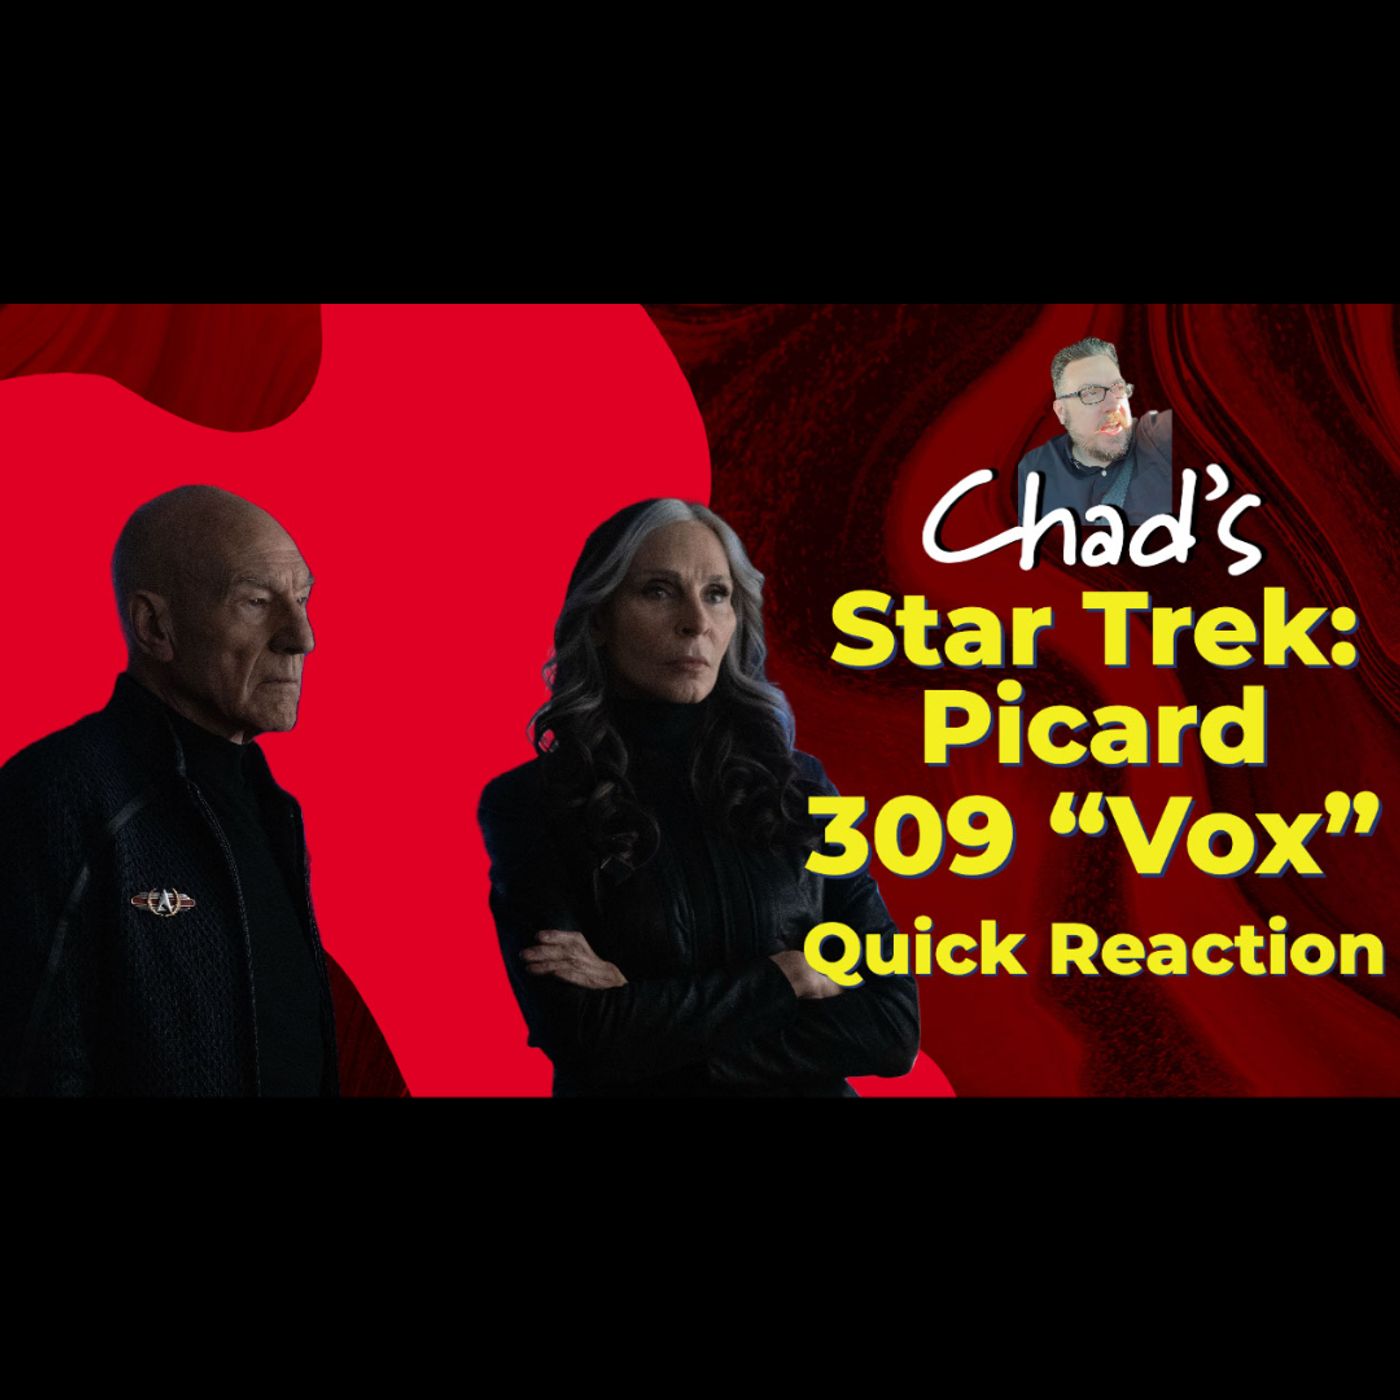 SPOILERS!!! Chad's Picard 309 